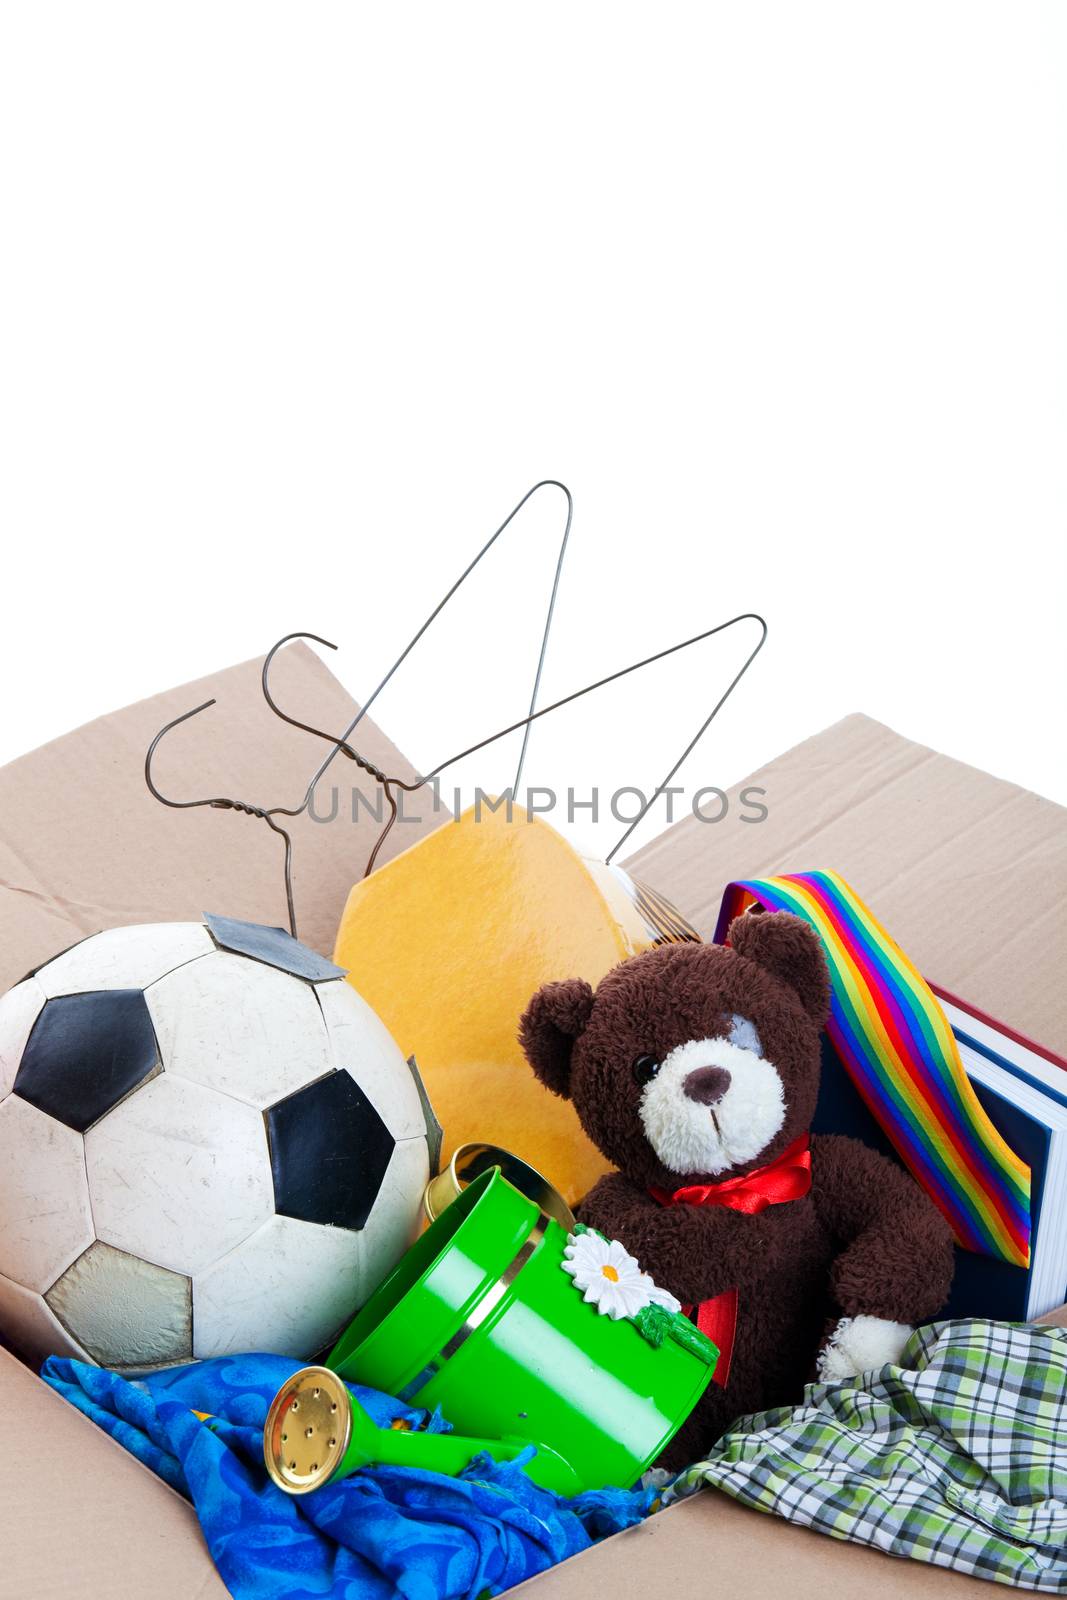 A box of unwanted stuff ready for a garage sale or to donate to a charitable organization.  Generic teddy bear.  Shot on white background.